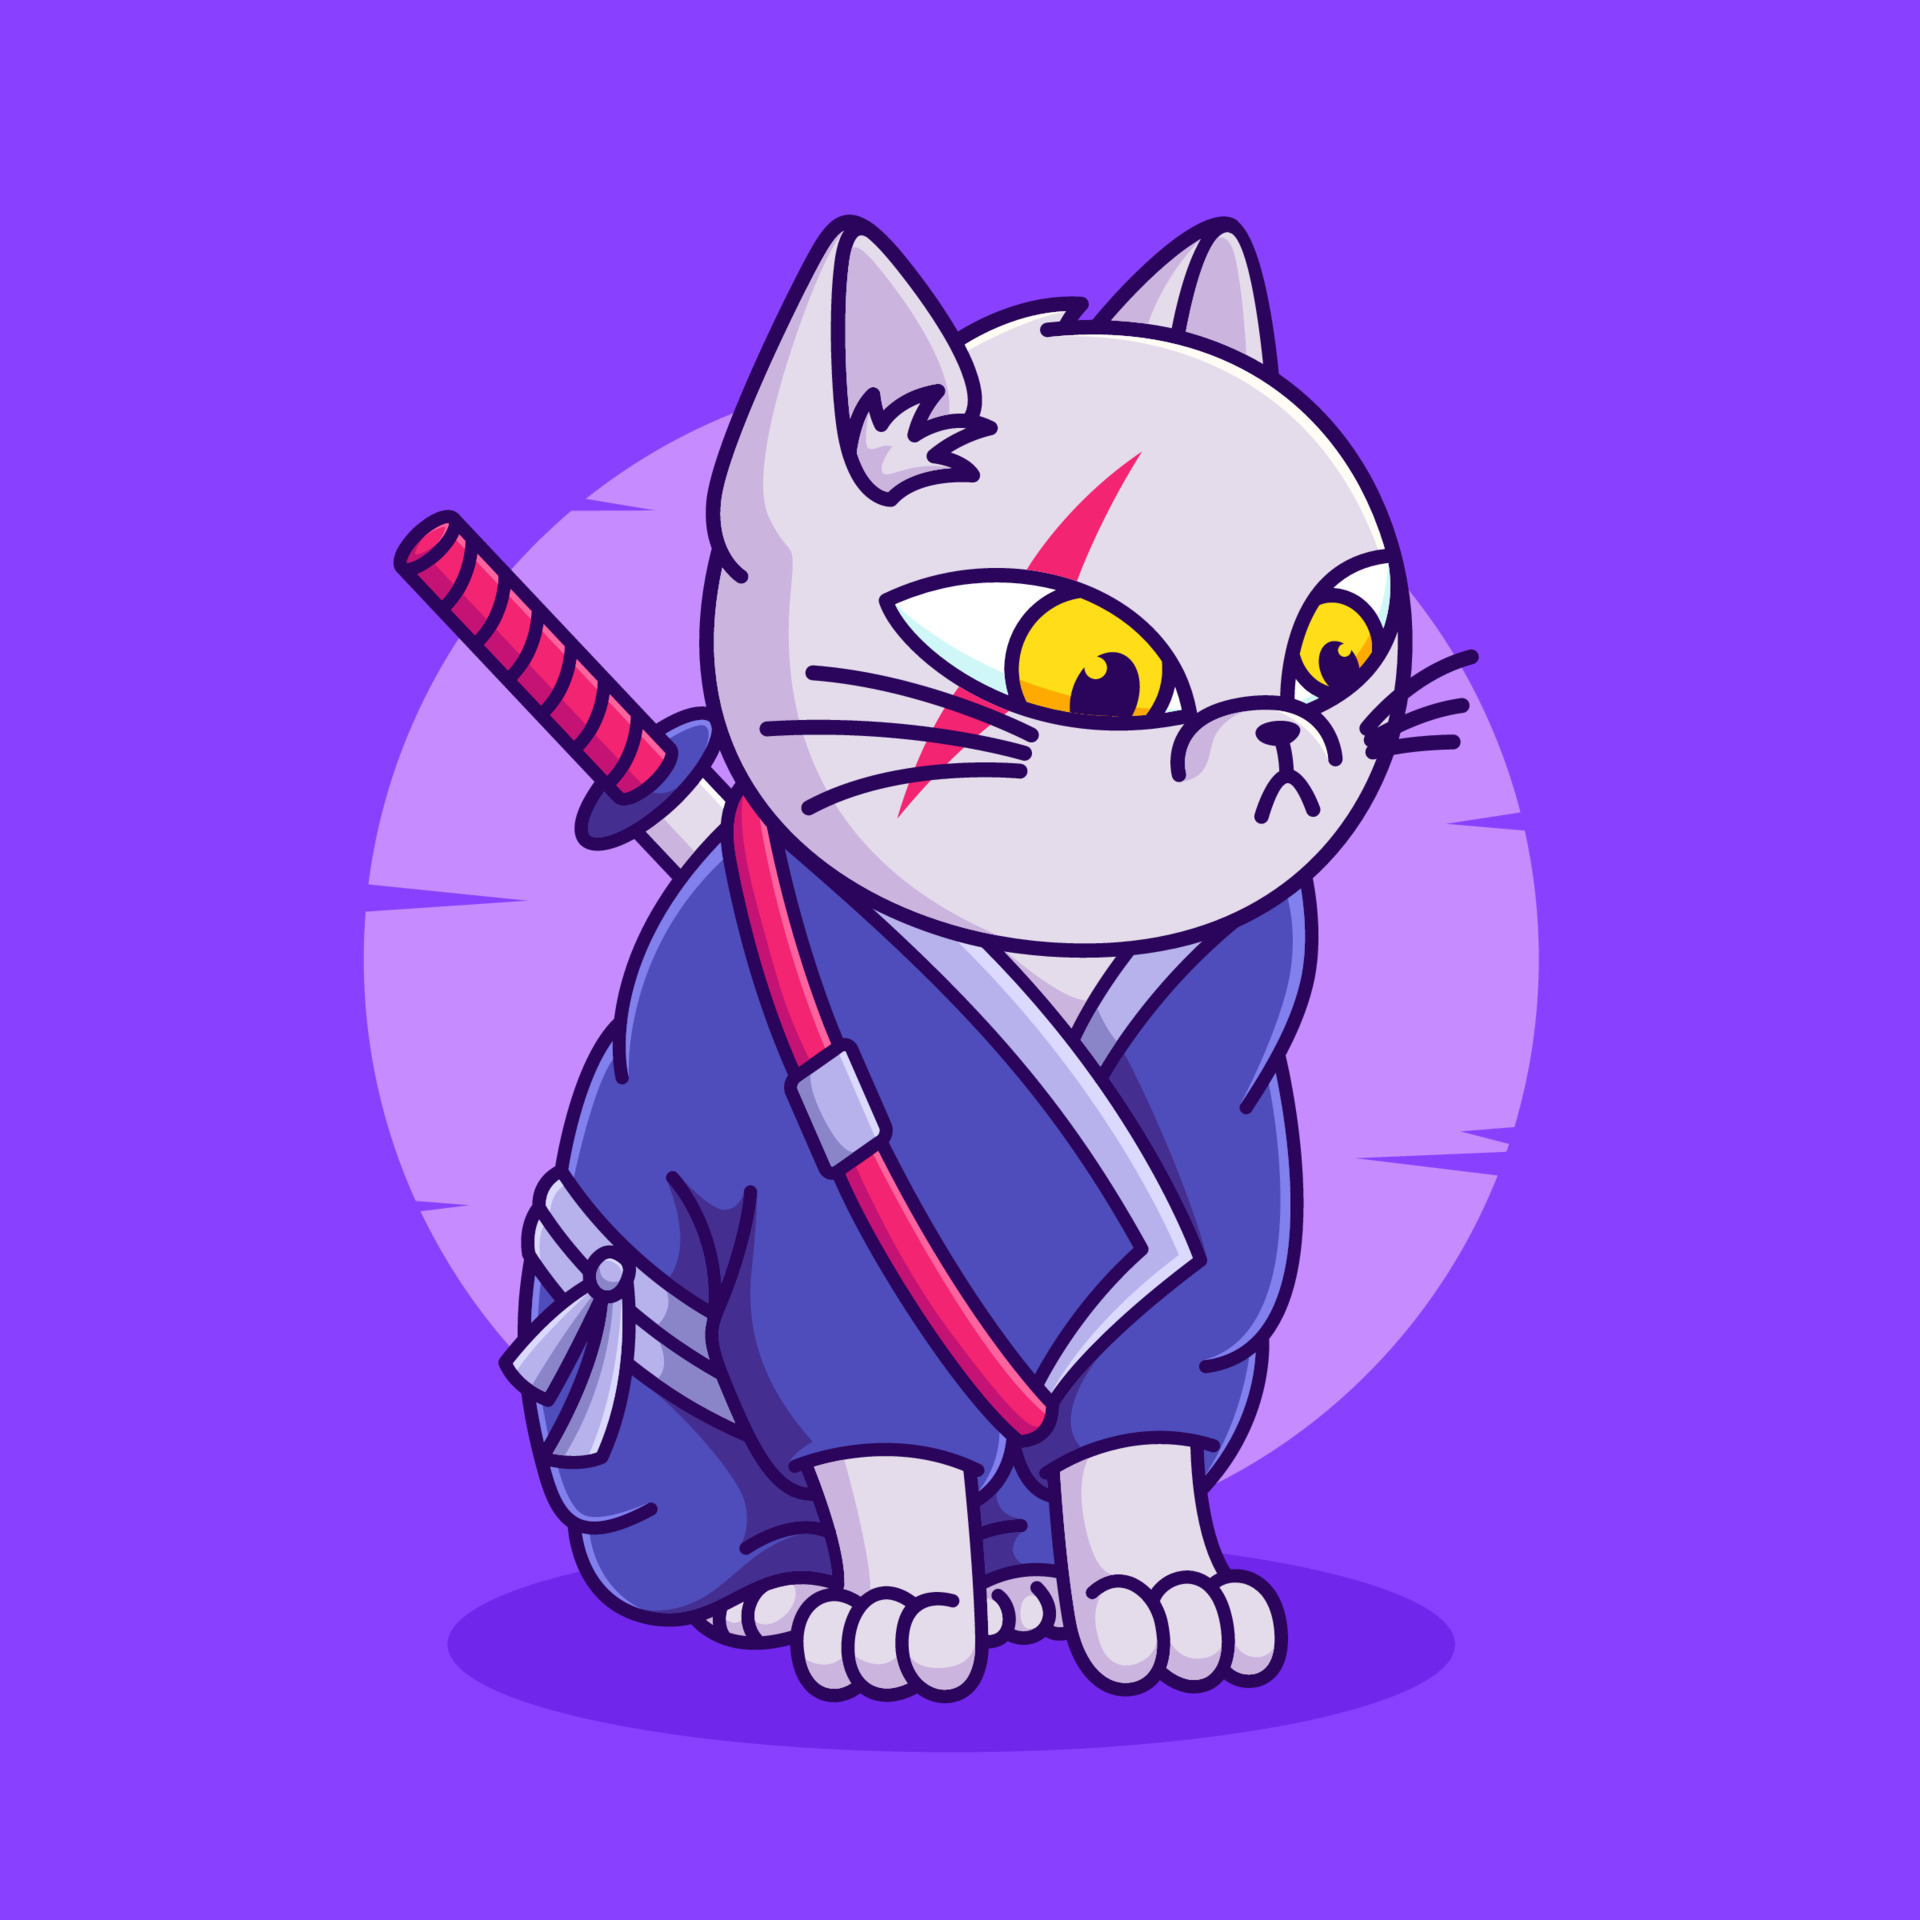 3D Anime Cat Ninja Samurai Hero Ready for Action with Yellow, Red, and Grey  Tones